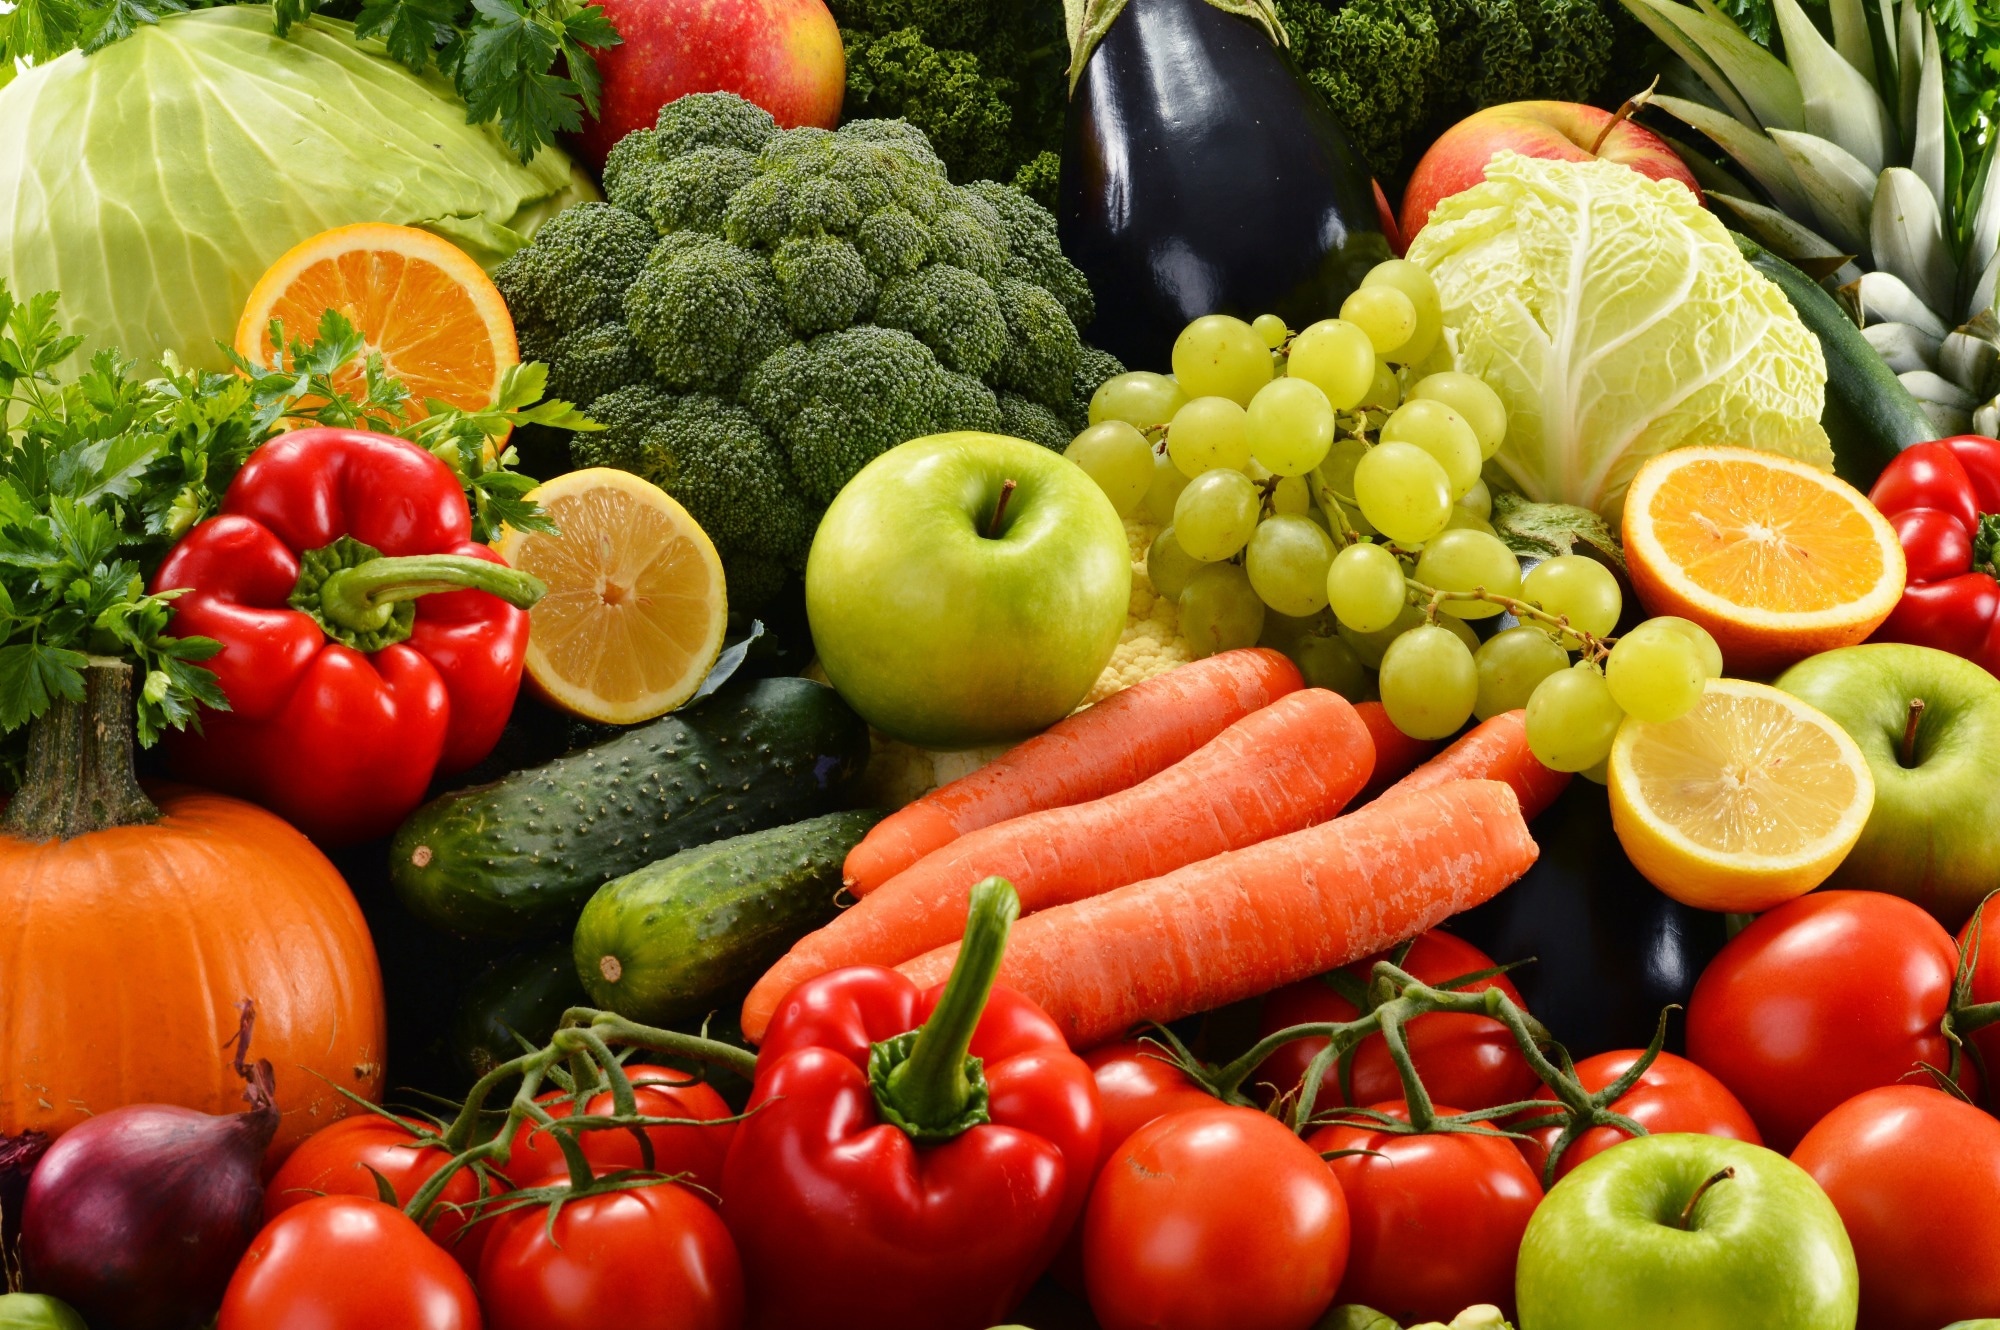 Study: Are exposure to health information and media health literacy associated with fruit and vegetable consumption? Image Credit: monticello/Shutterstock.com